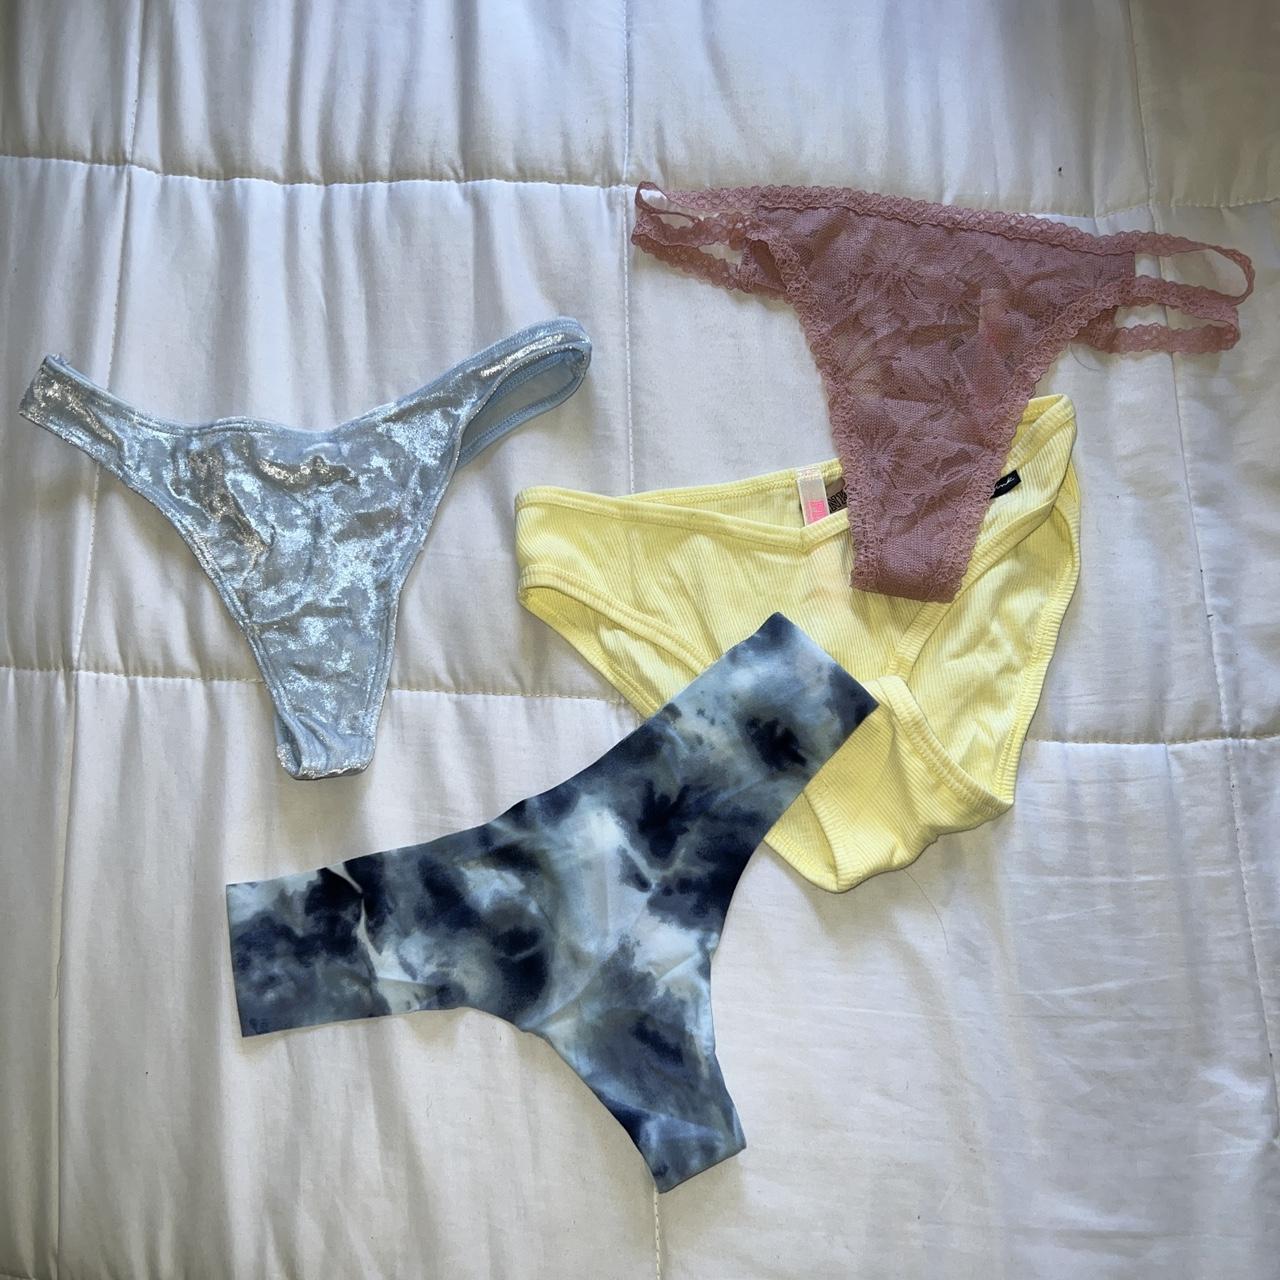 Lot of 4 Victoria's Secret Size Medium Pairs of Panties New with